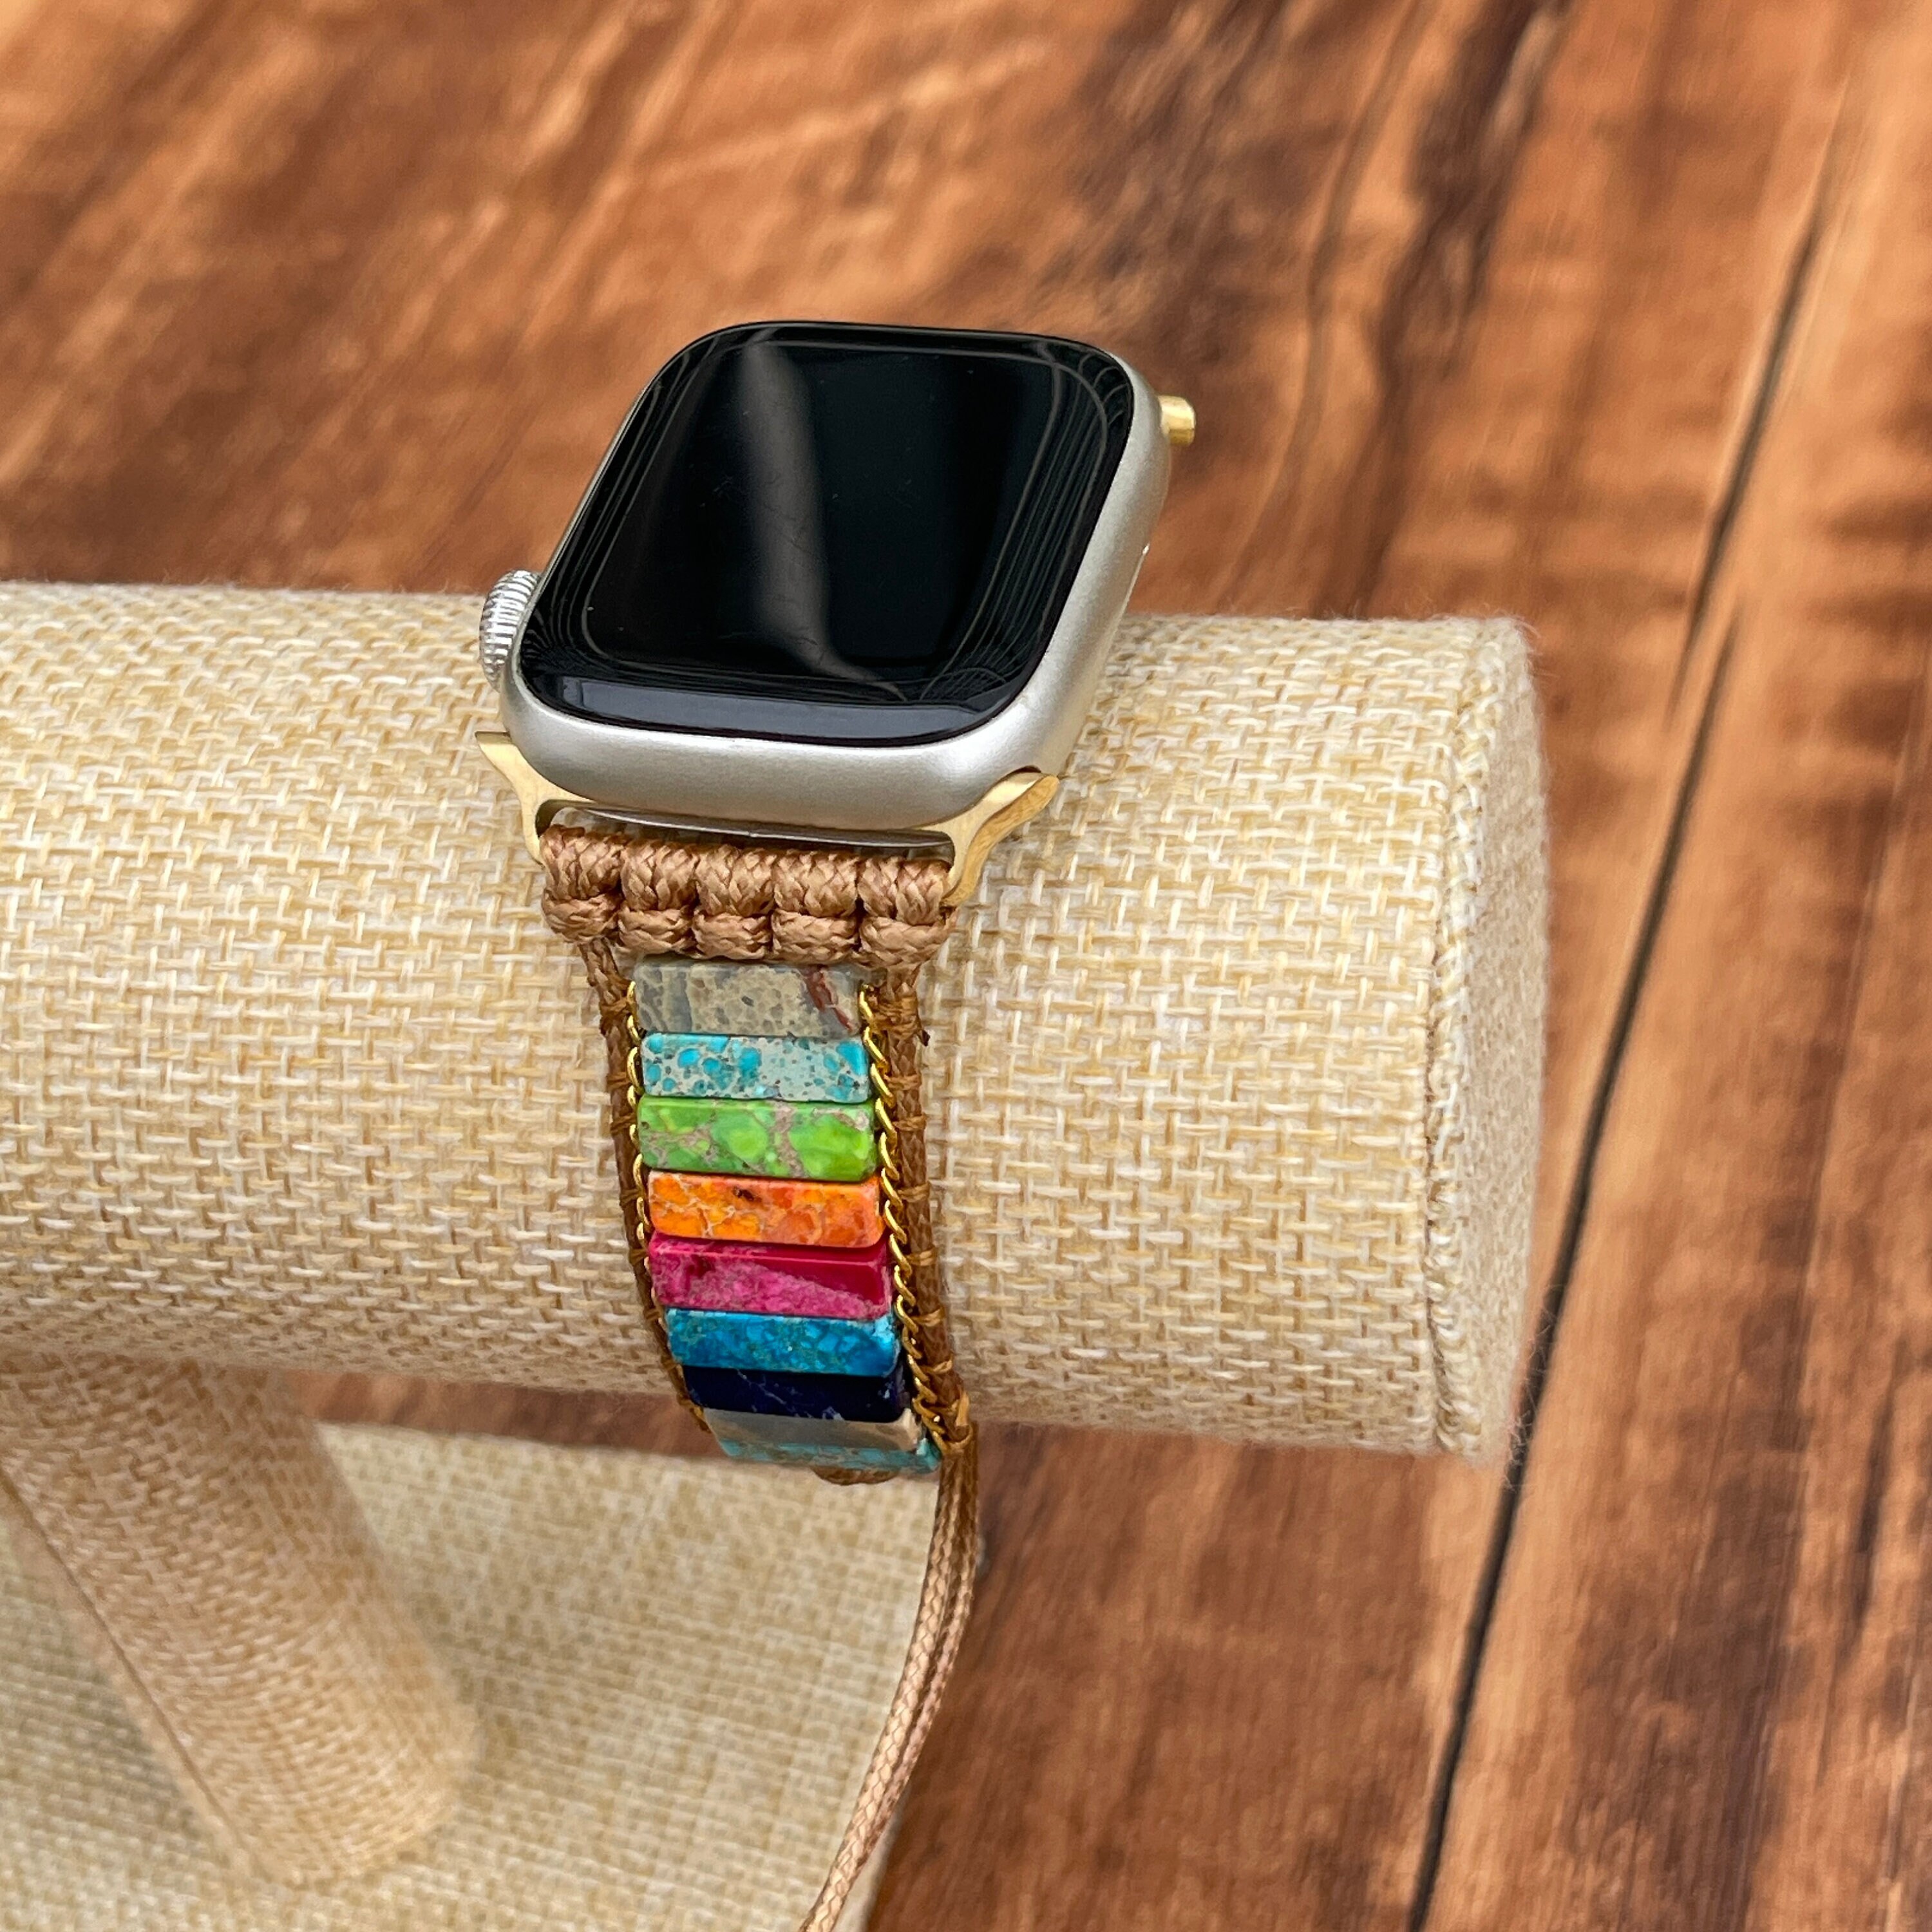 Designer Bands for your Apple Watch, Luxury Apple Watch Straps 41mm –  Eternitizzz Straps and Accessories